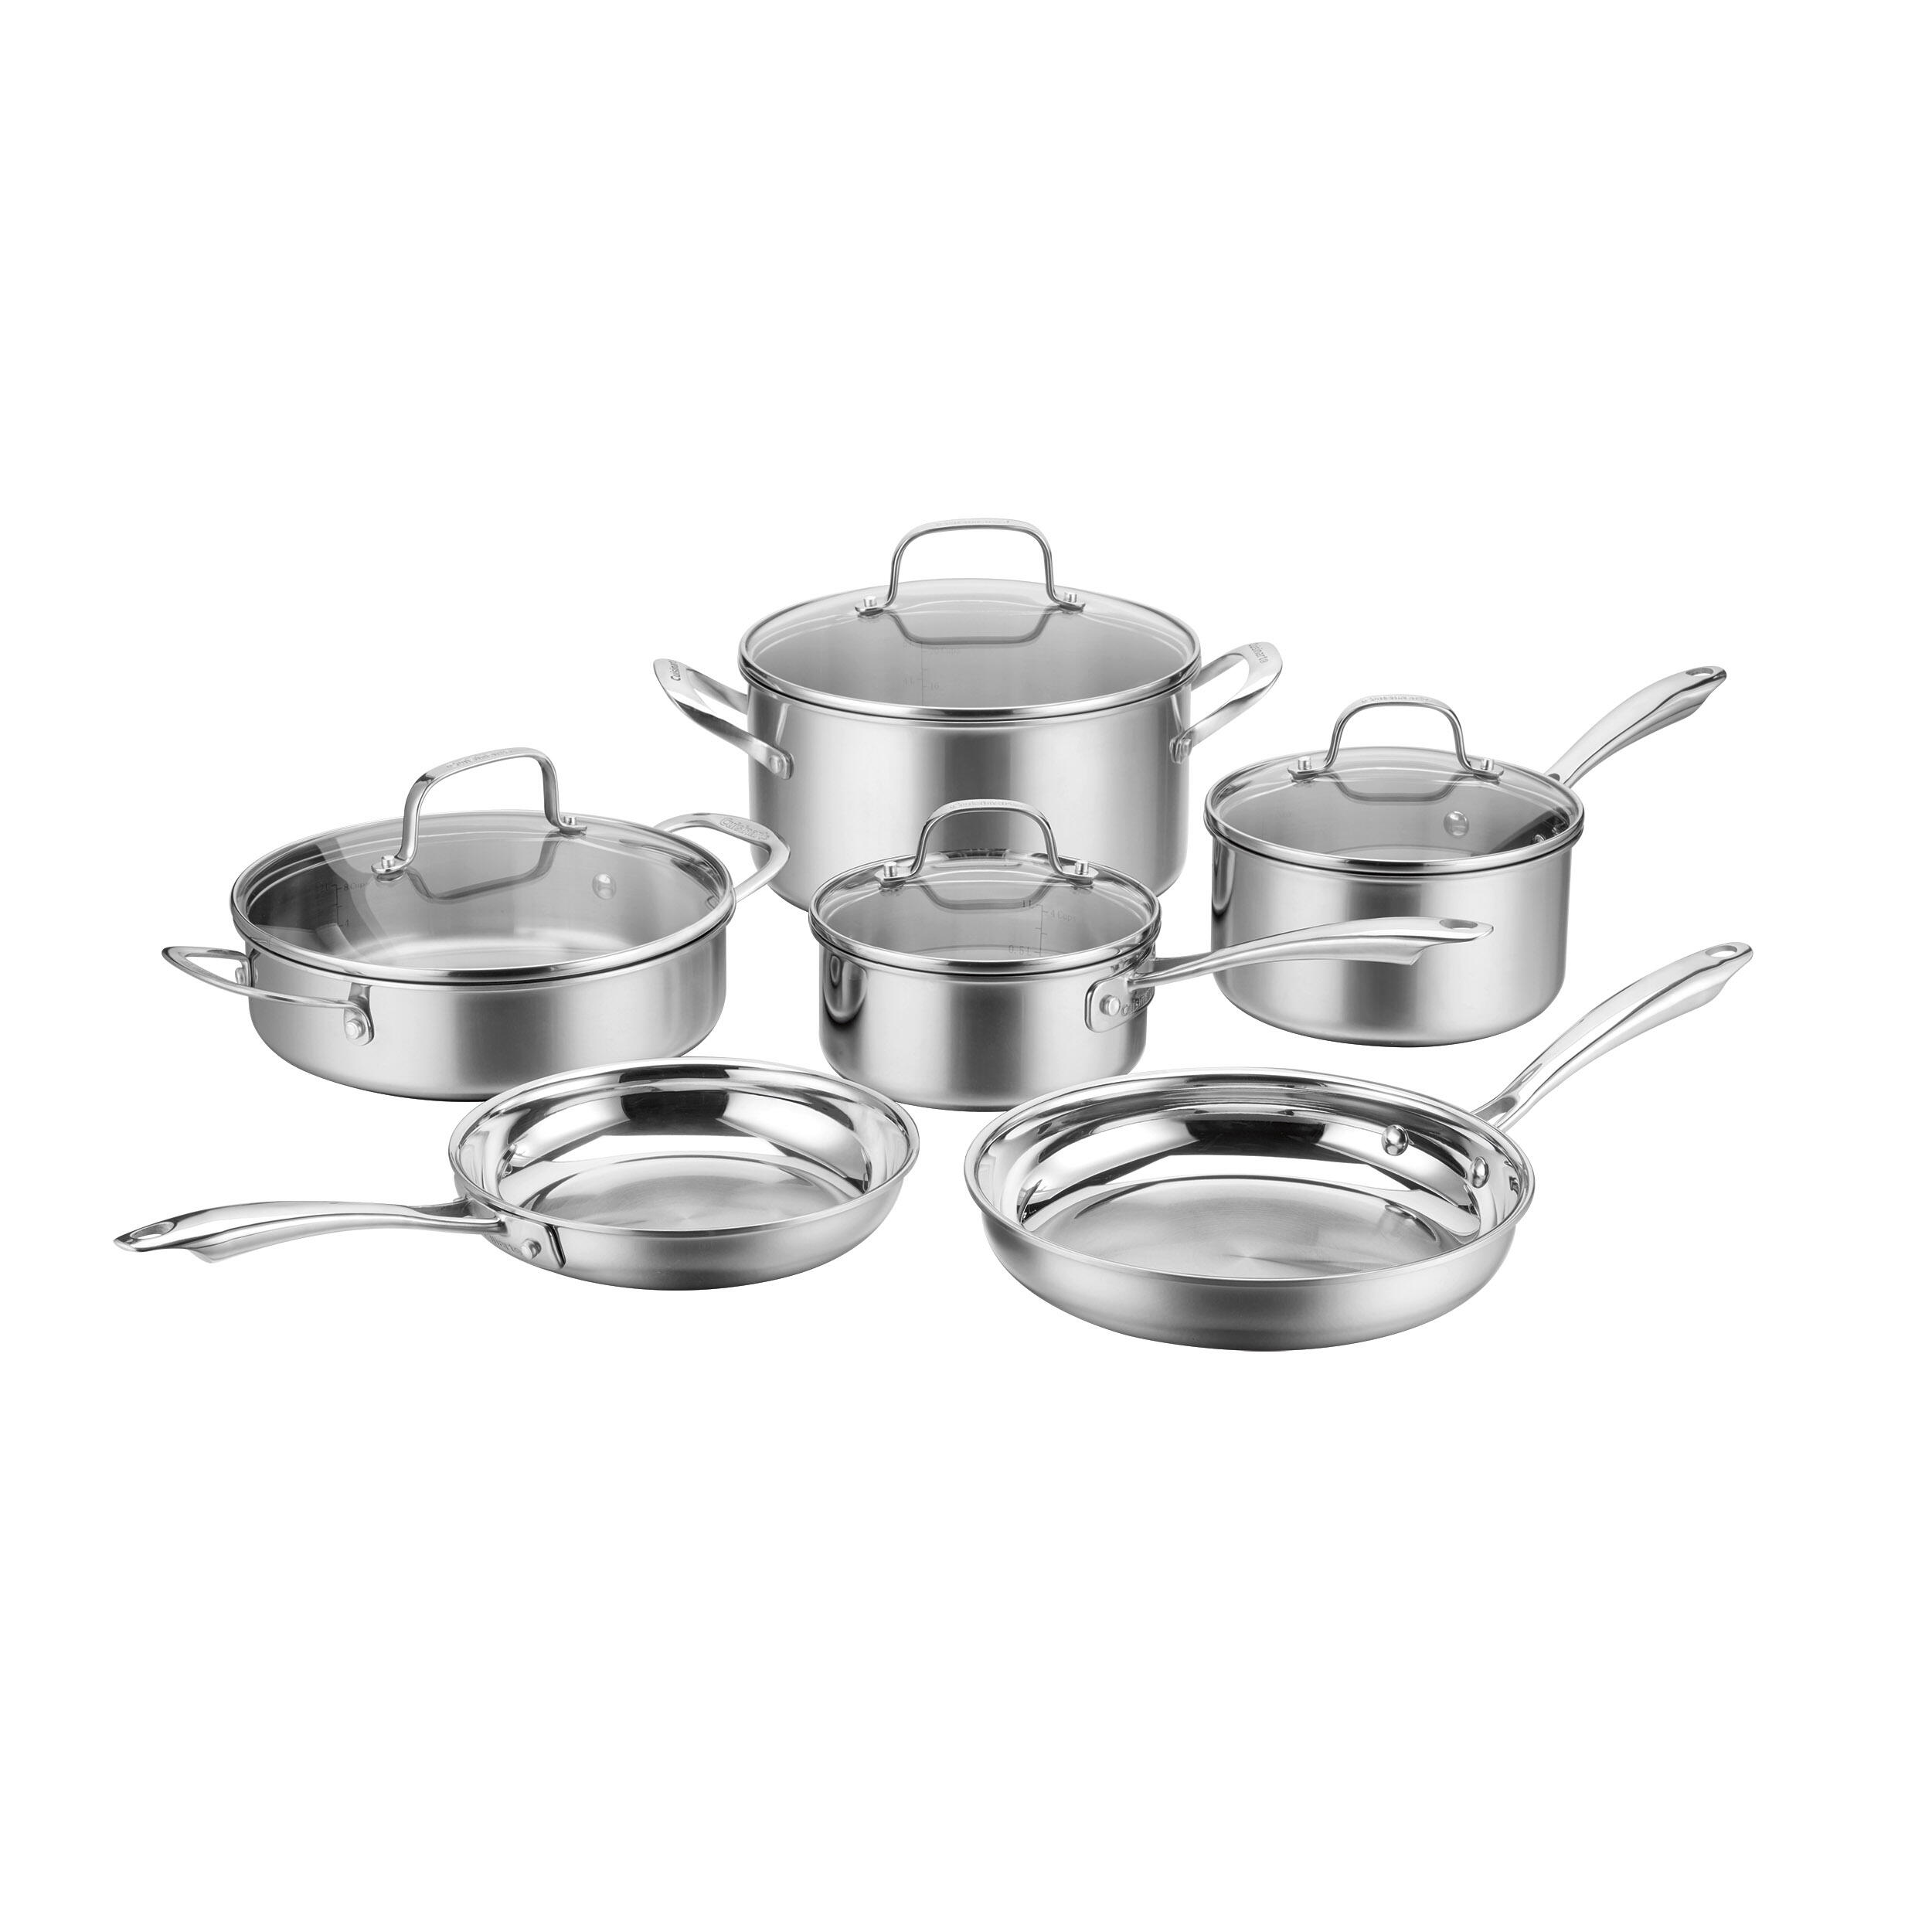 https://images.homedepot-static.com/productImages/127b8b80-f4e5-4be8-95f0-02fcb94553eb/svn/stainless-steel-cuisinart-cookware-sets-ptp-10-64_max.jpg